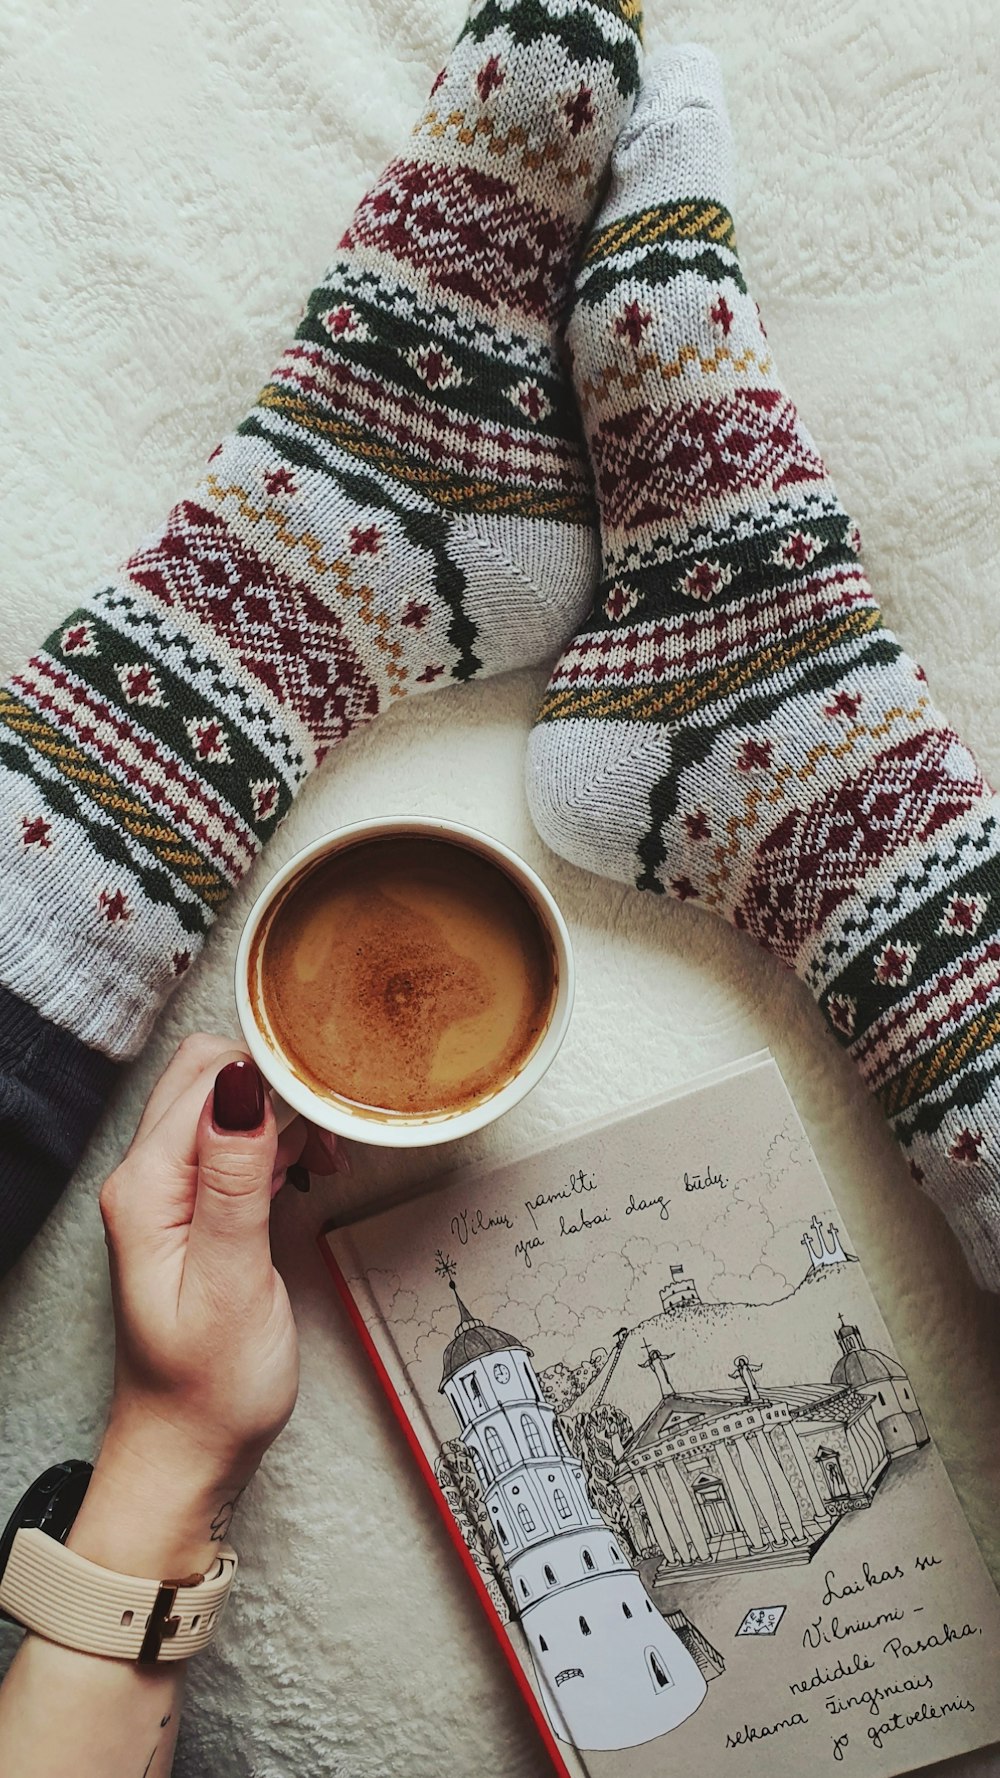 a person holding a cup of coffee next to a book